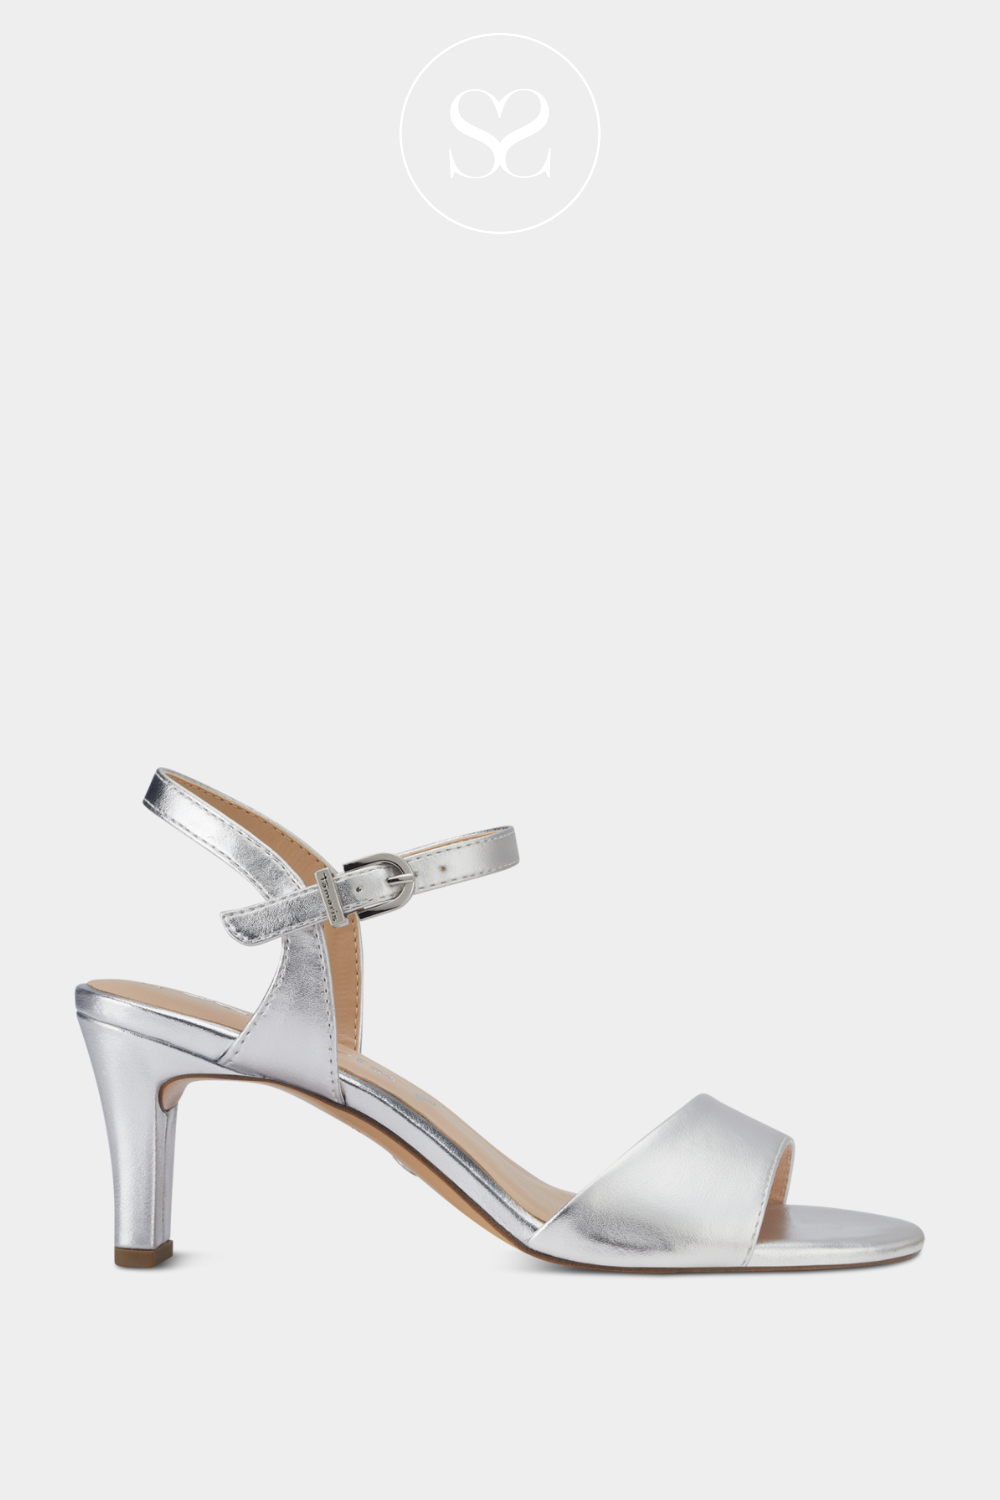 TAMARIS 1-28008-42 SILVER METALLIC LOW HEELED SUMMER SANDALS WITH ADJUSTABLE ANKLE STRAP